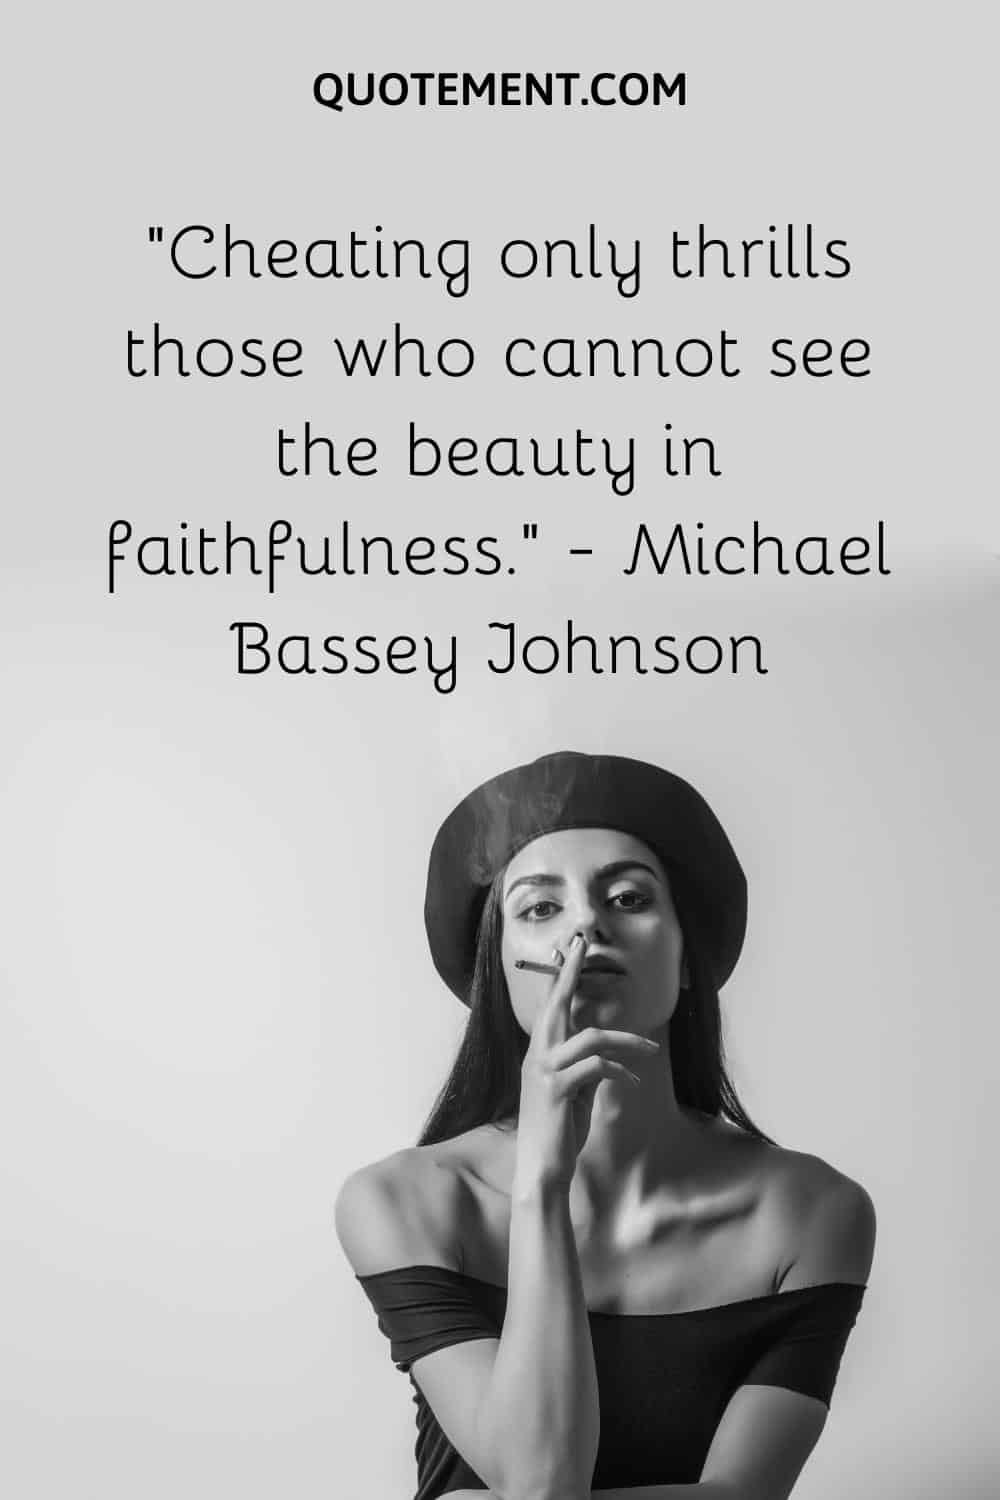 Cheating only thrills those who cannot see the beauty in faithfulness